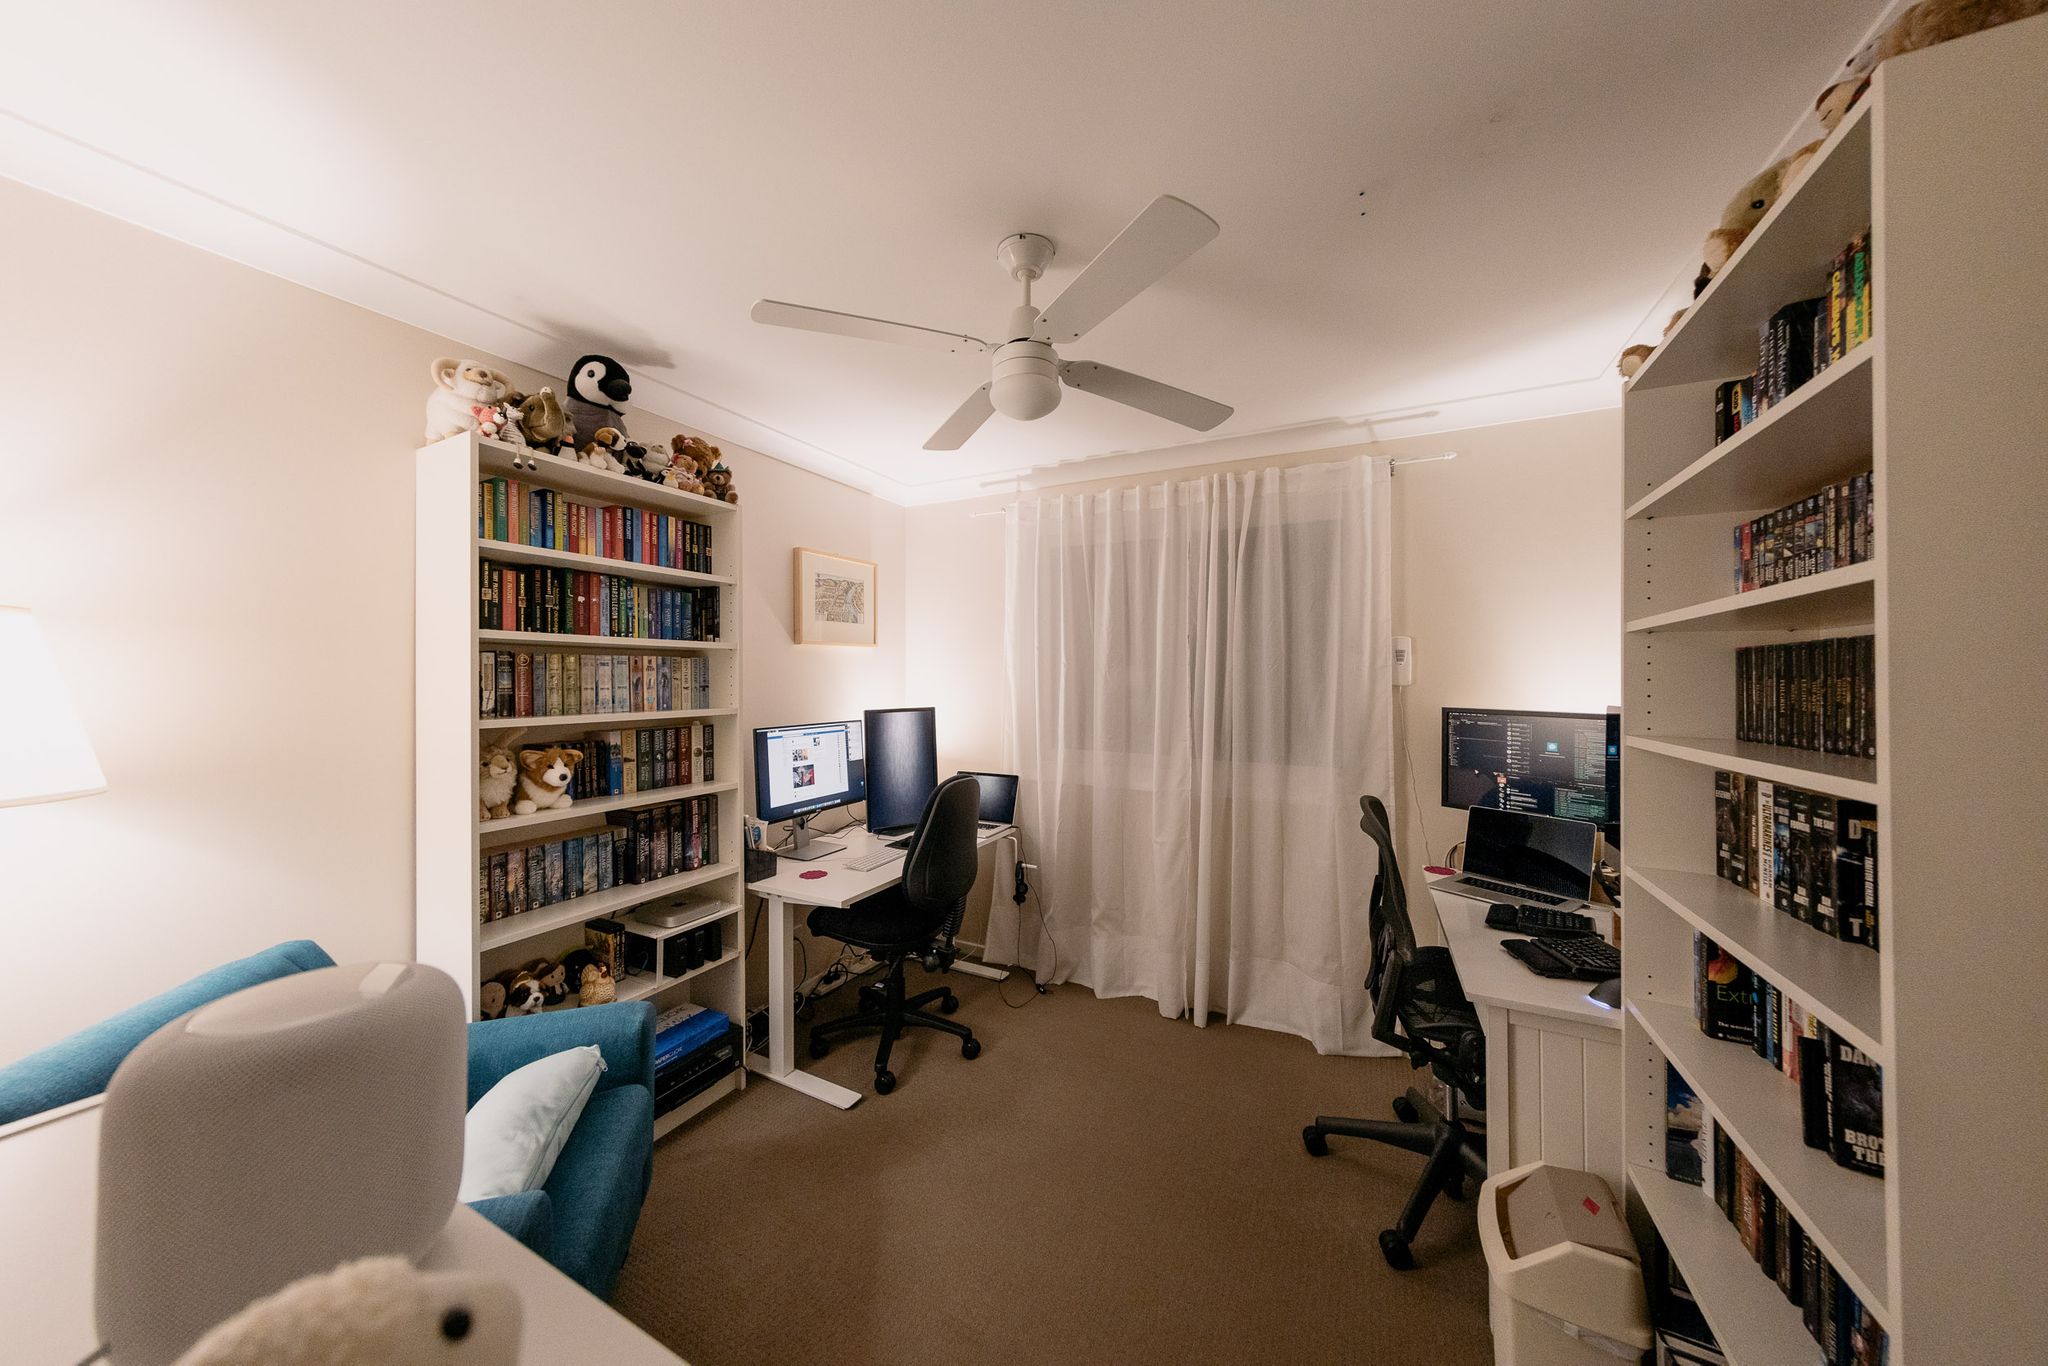 A wide-angle photo of our office. At the left and right walls are two white bookshelves with lots of books on them, right next to both are two desks with computers on them. There are stuffed animals on the top of the bookshelves, and a half-height bookshelf immediately to the bottom-left of the photo with a white Apple HomePod sitting on it.